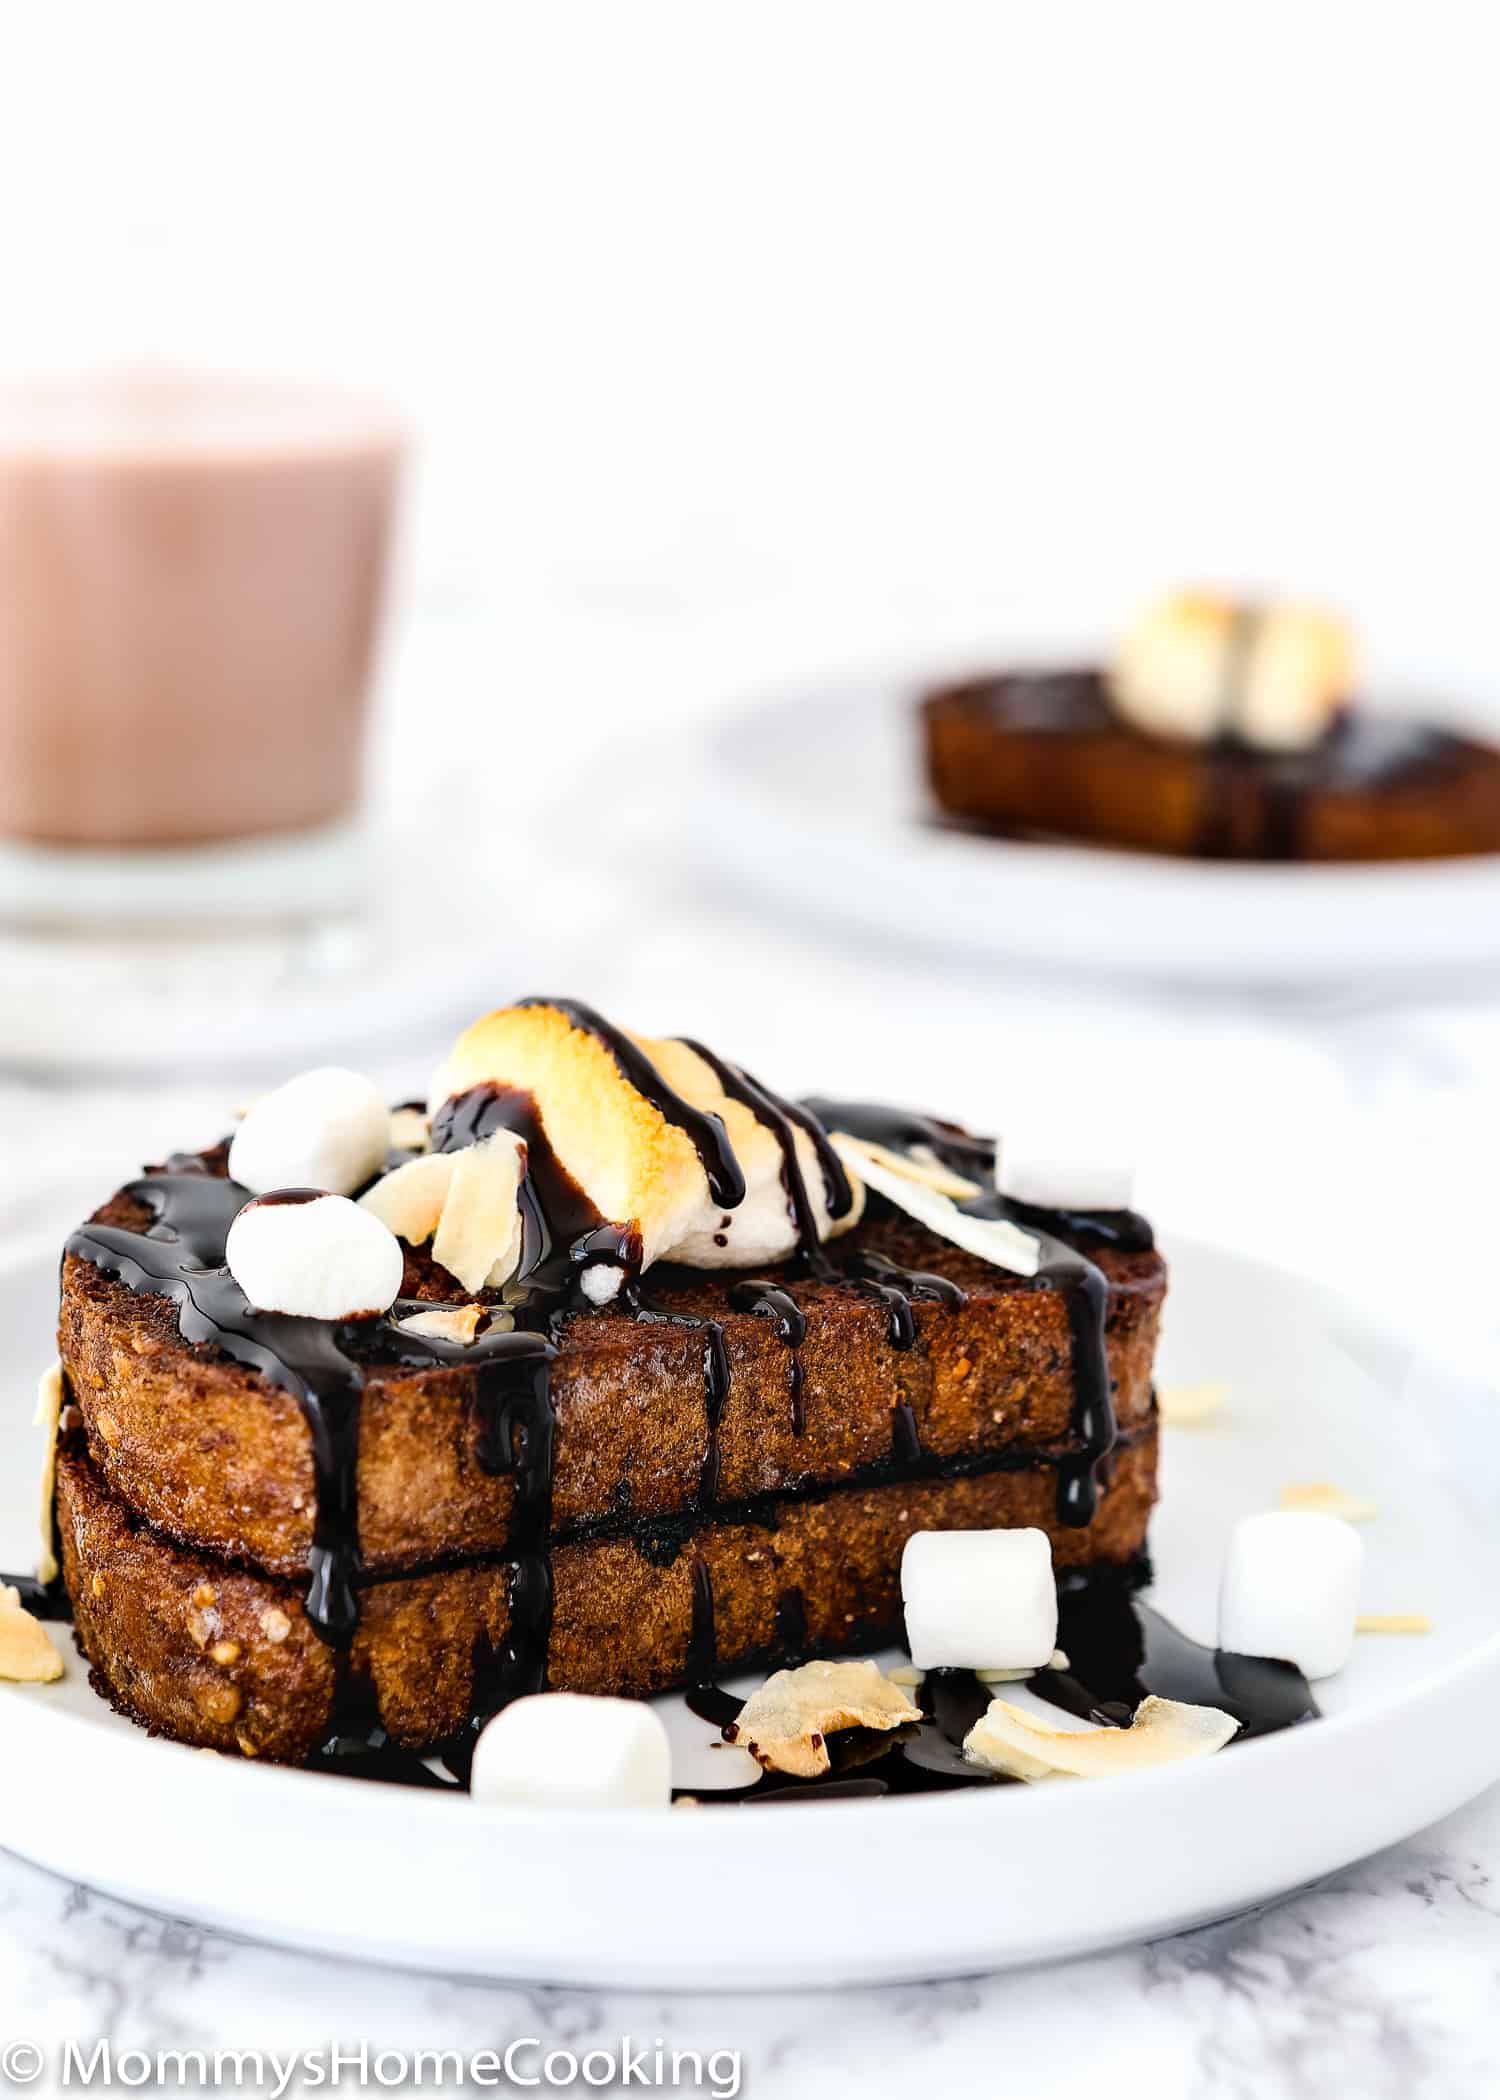 This Easy Eggless Chocolate French Toast is delicious, ridiculously easy to make and will be ready in a flash! With slightly crisp outsides, and light yet custardy insides, this chocolate French toast is perfect to satisfy those sweet-tooth cravings. https://mommyshome cooking.com